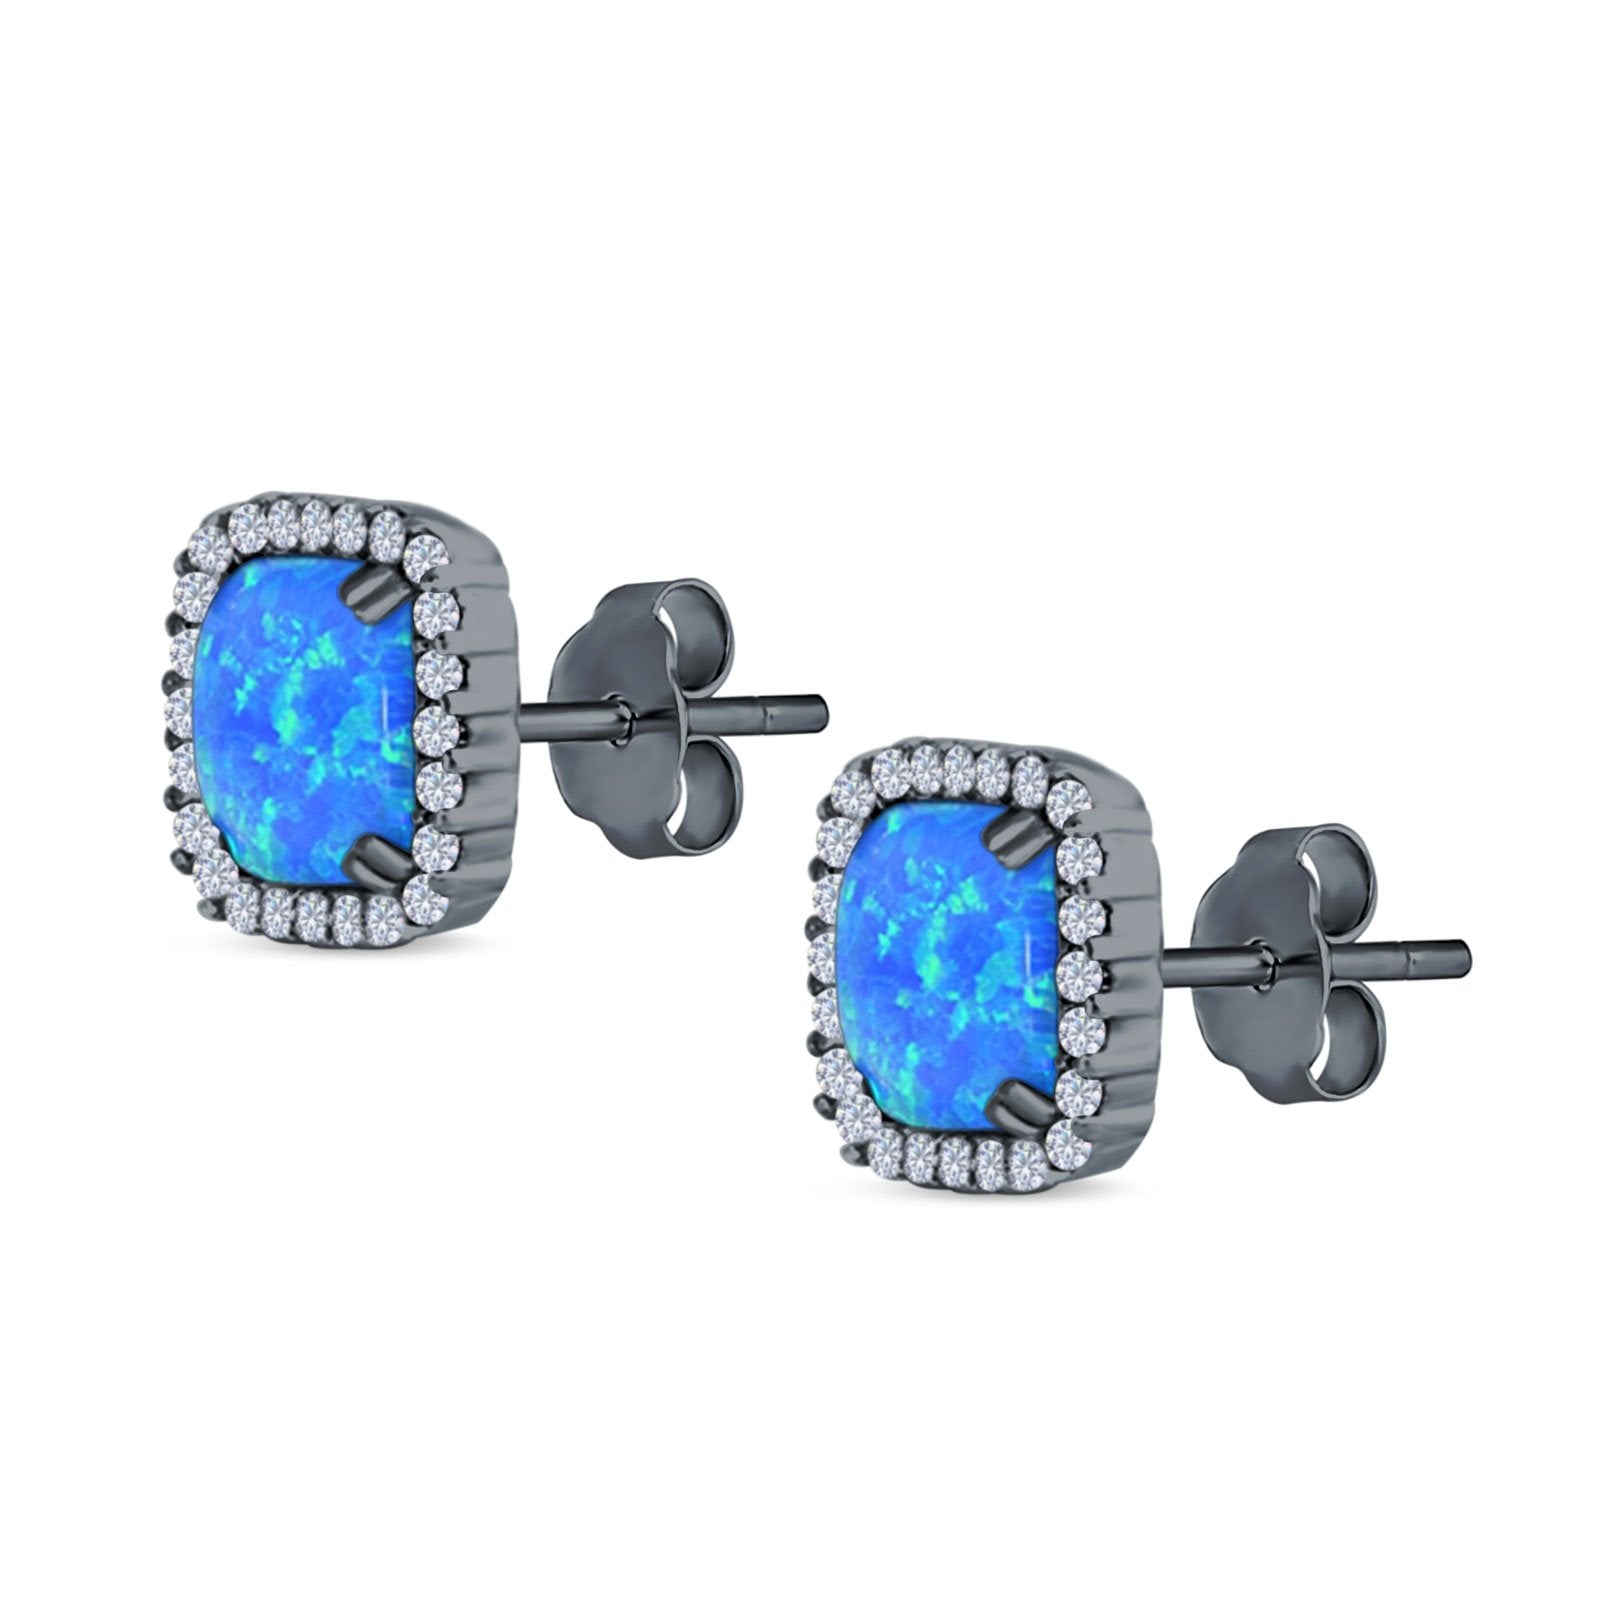 Halo Cushion Created Opal Round CZ Stud Earrings 925 Sterling Silver (11mm)